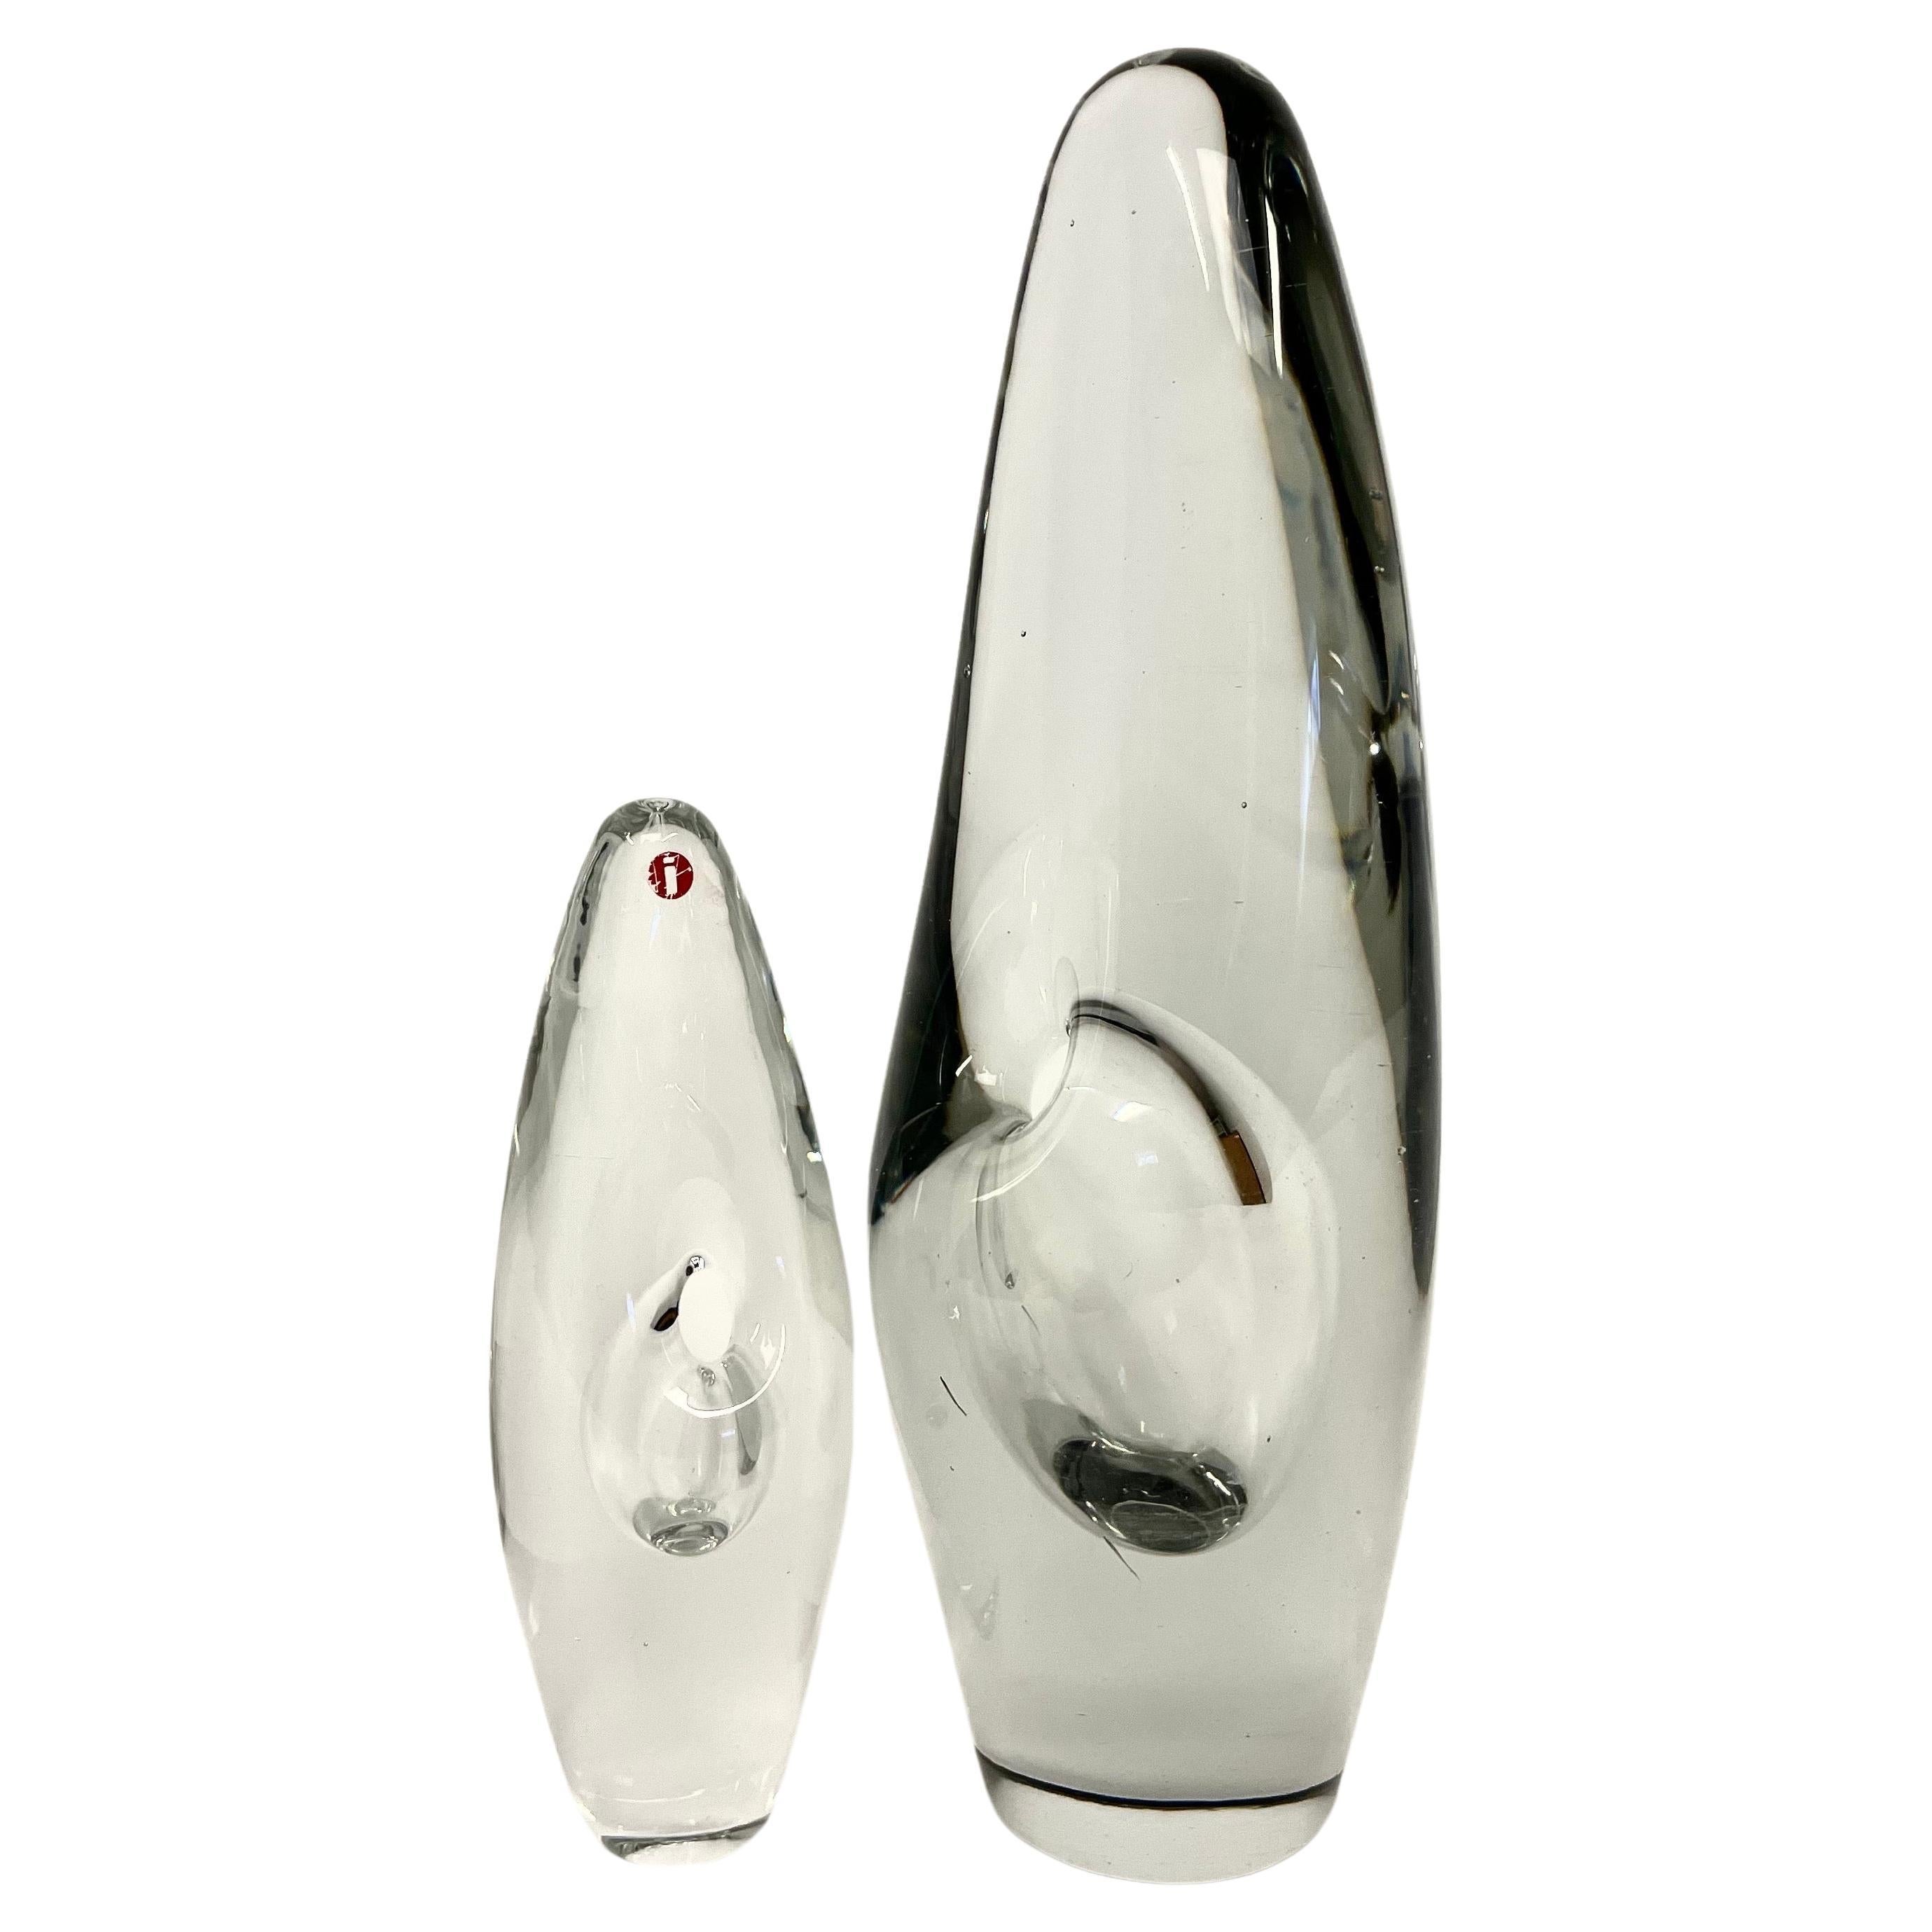 A Pair of Finnish 1950s Vases Model Orchidéa by Timo Sarpaneva for Ittala For Sale